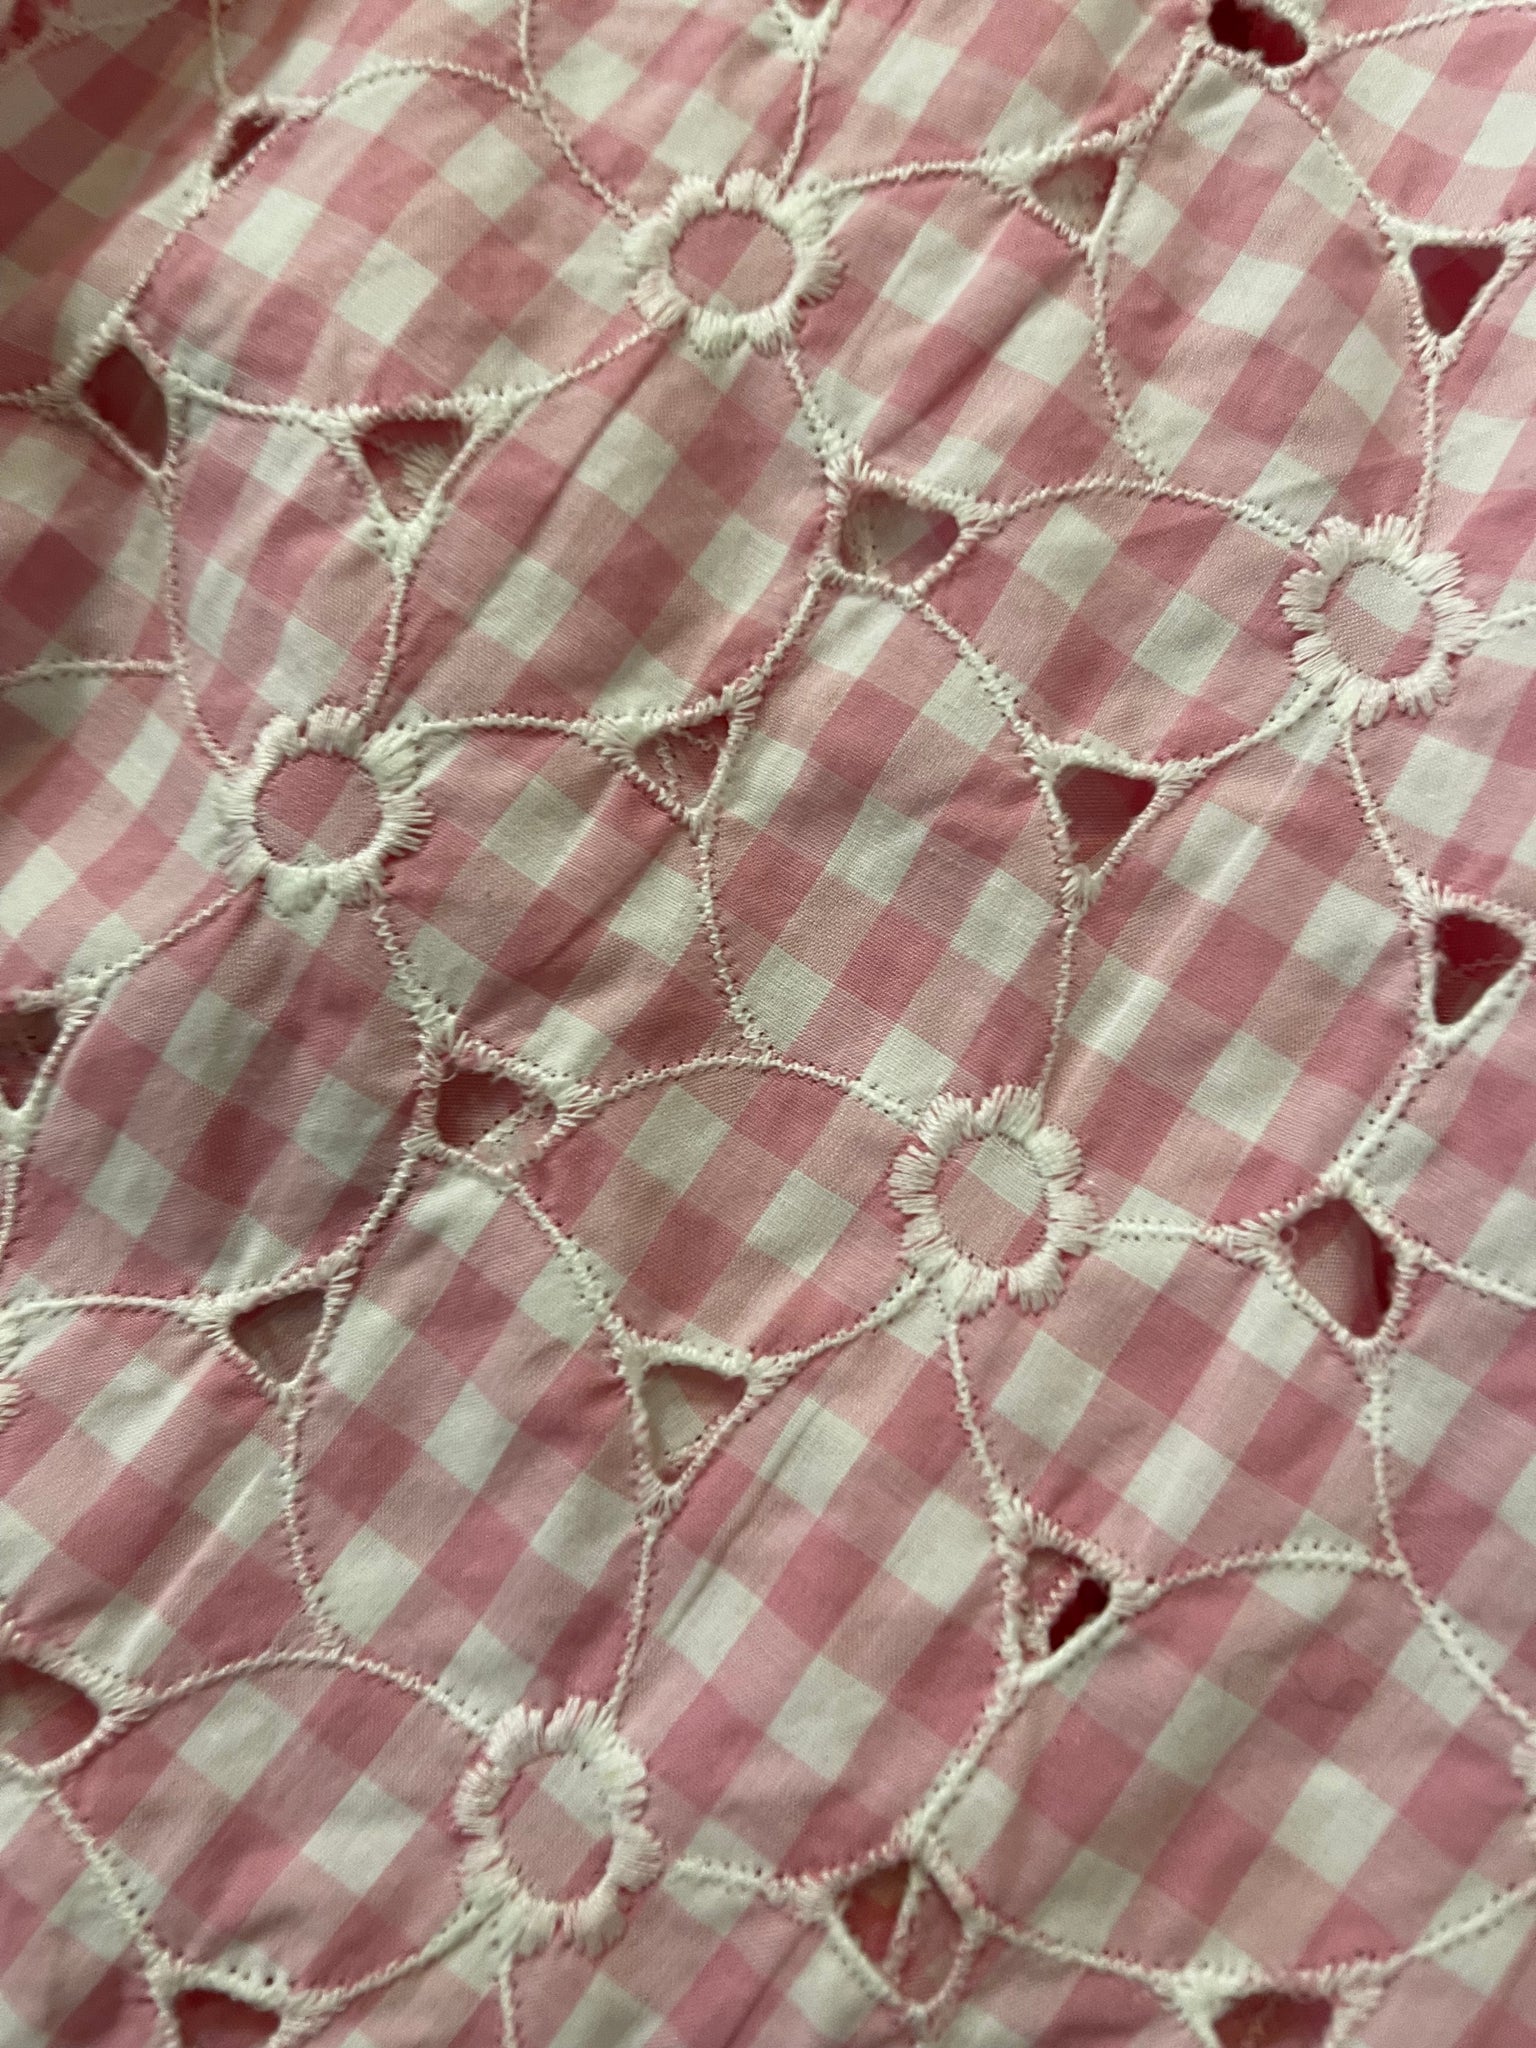 Junya Watanabe for Comme des Garcons Pink Gingham Blouse CLOSE UP 4 of 5